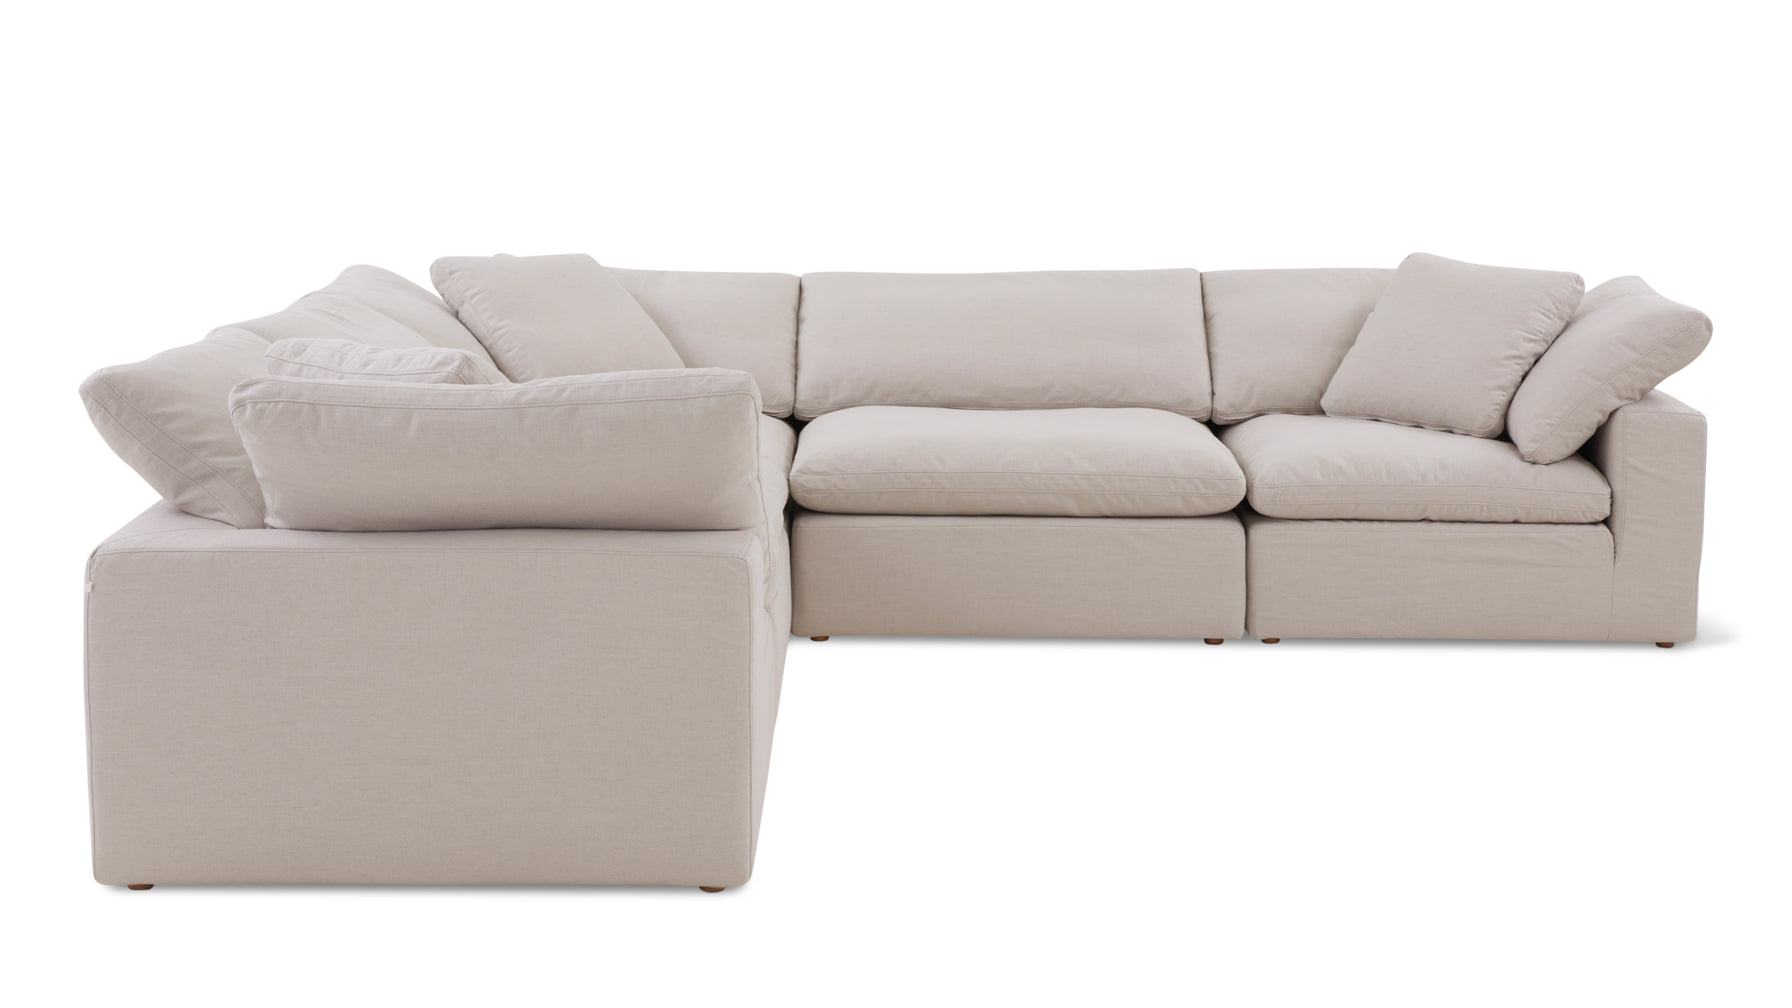 Movie Night™ 5-Piece Modular Sectional Closed, Standard, Clay - Image 7